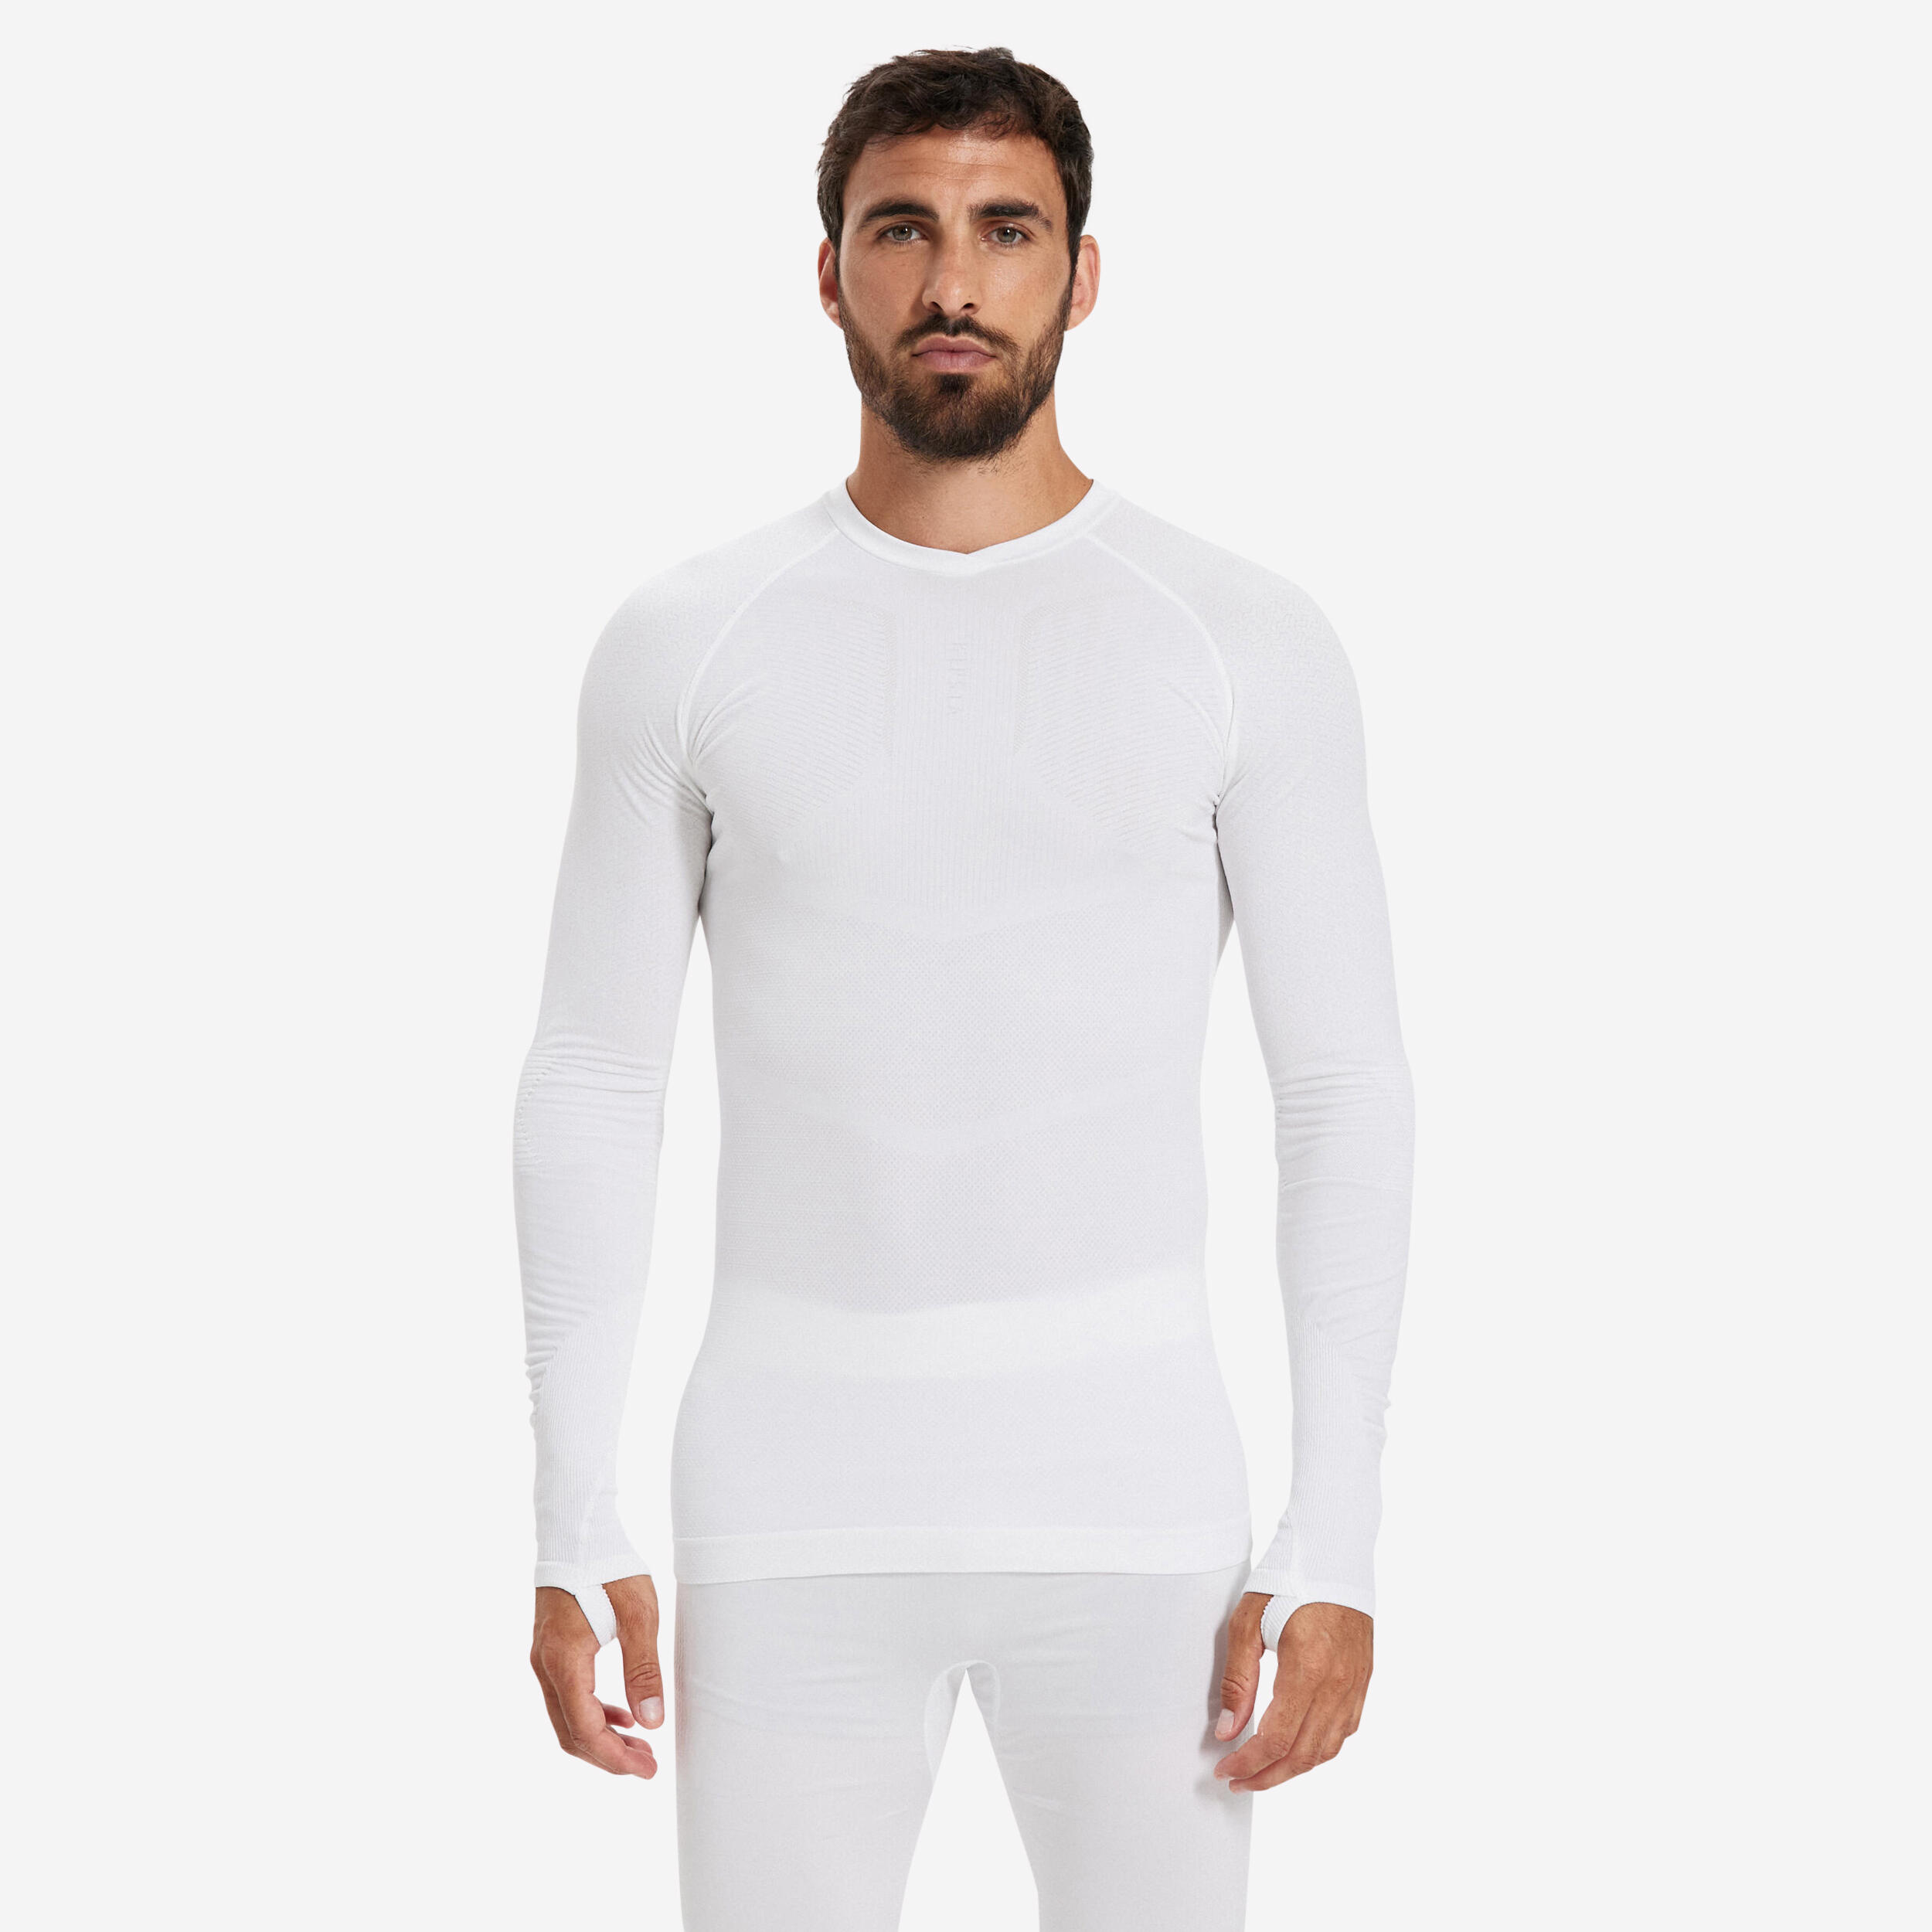 KIPSTA Adult Long-Sleeved Thermal Base Layer Top Keepdry 500 - White